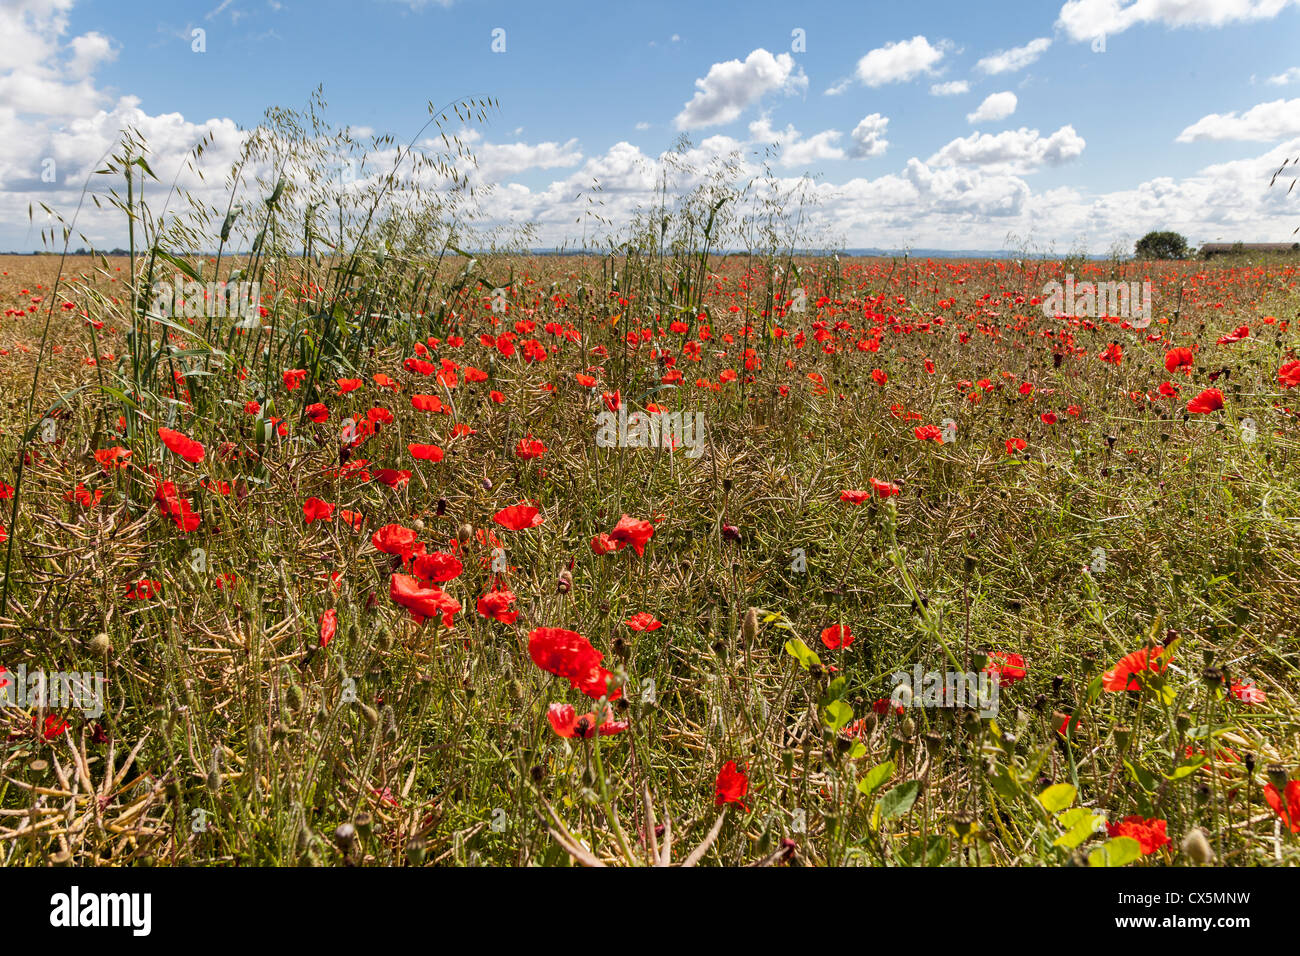 RED/SCARLET POPPIES GROWING IN FILED OF OIL SEED RAPE IN SUMMER IN WILTSHIRE ENGLAND UK Stock Photo